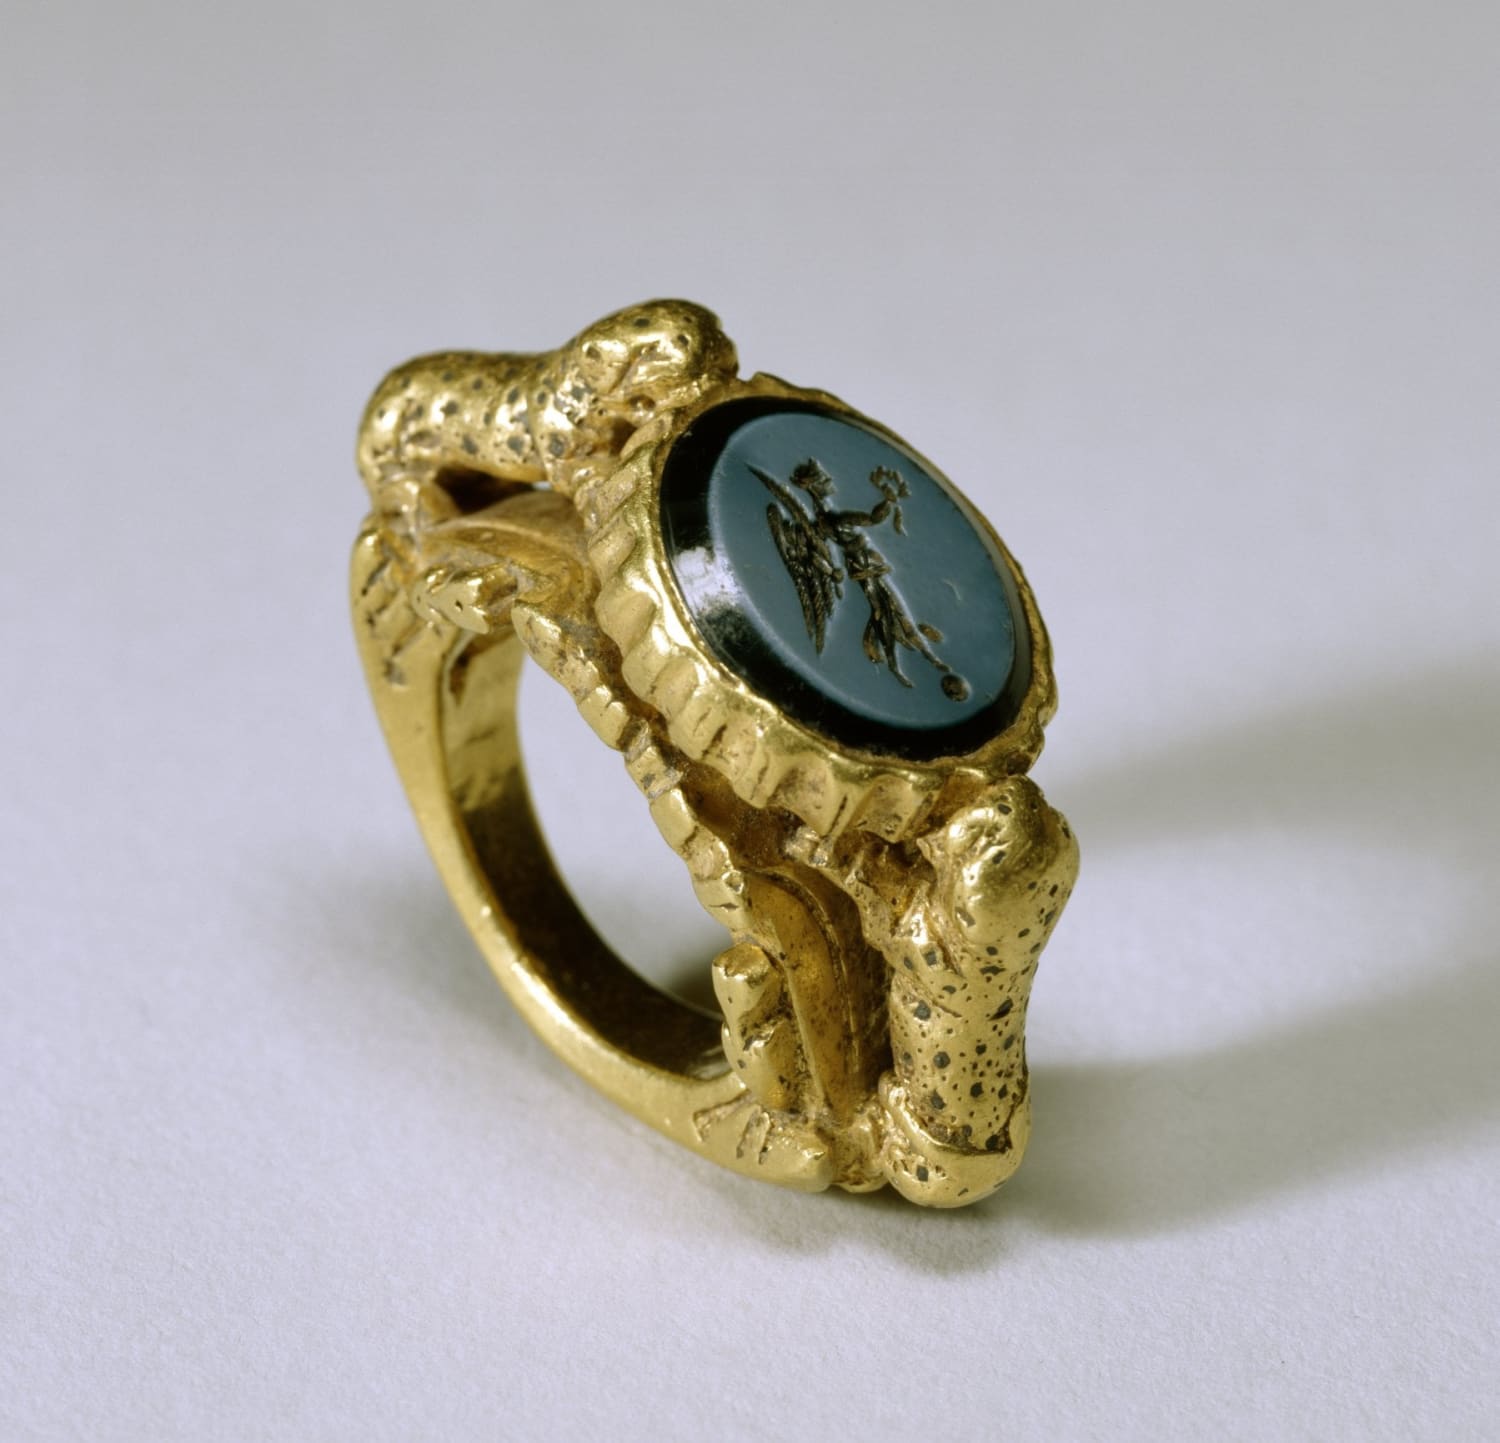 Ancient Byzantine gold ring featuring a blue nicolo intaglio carving of Nike supported by two gold leopards, 4th century CE.